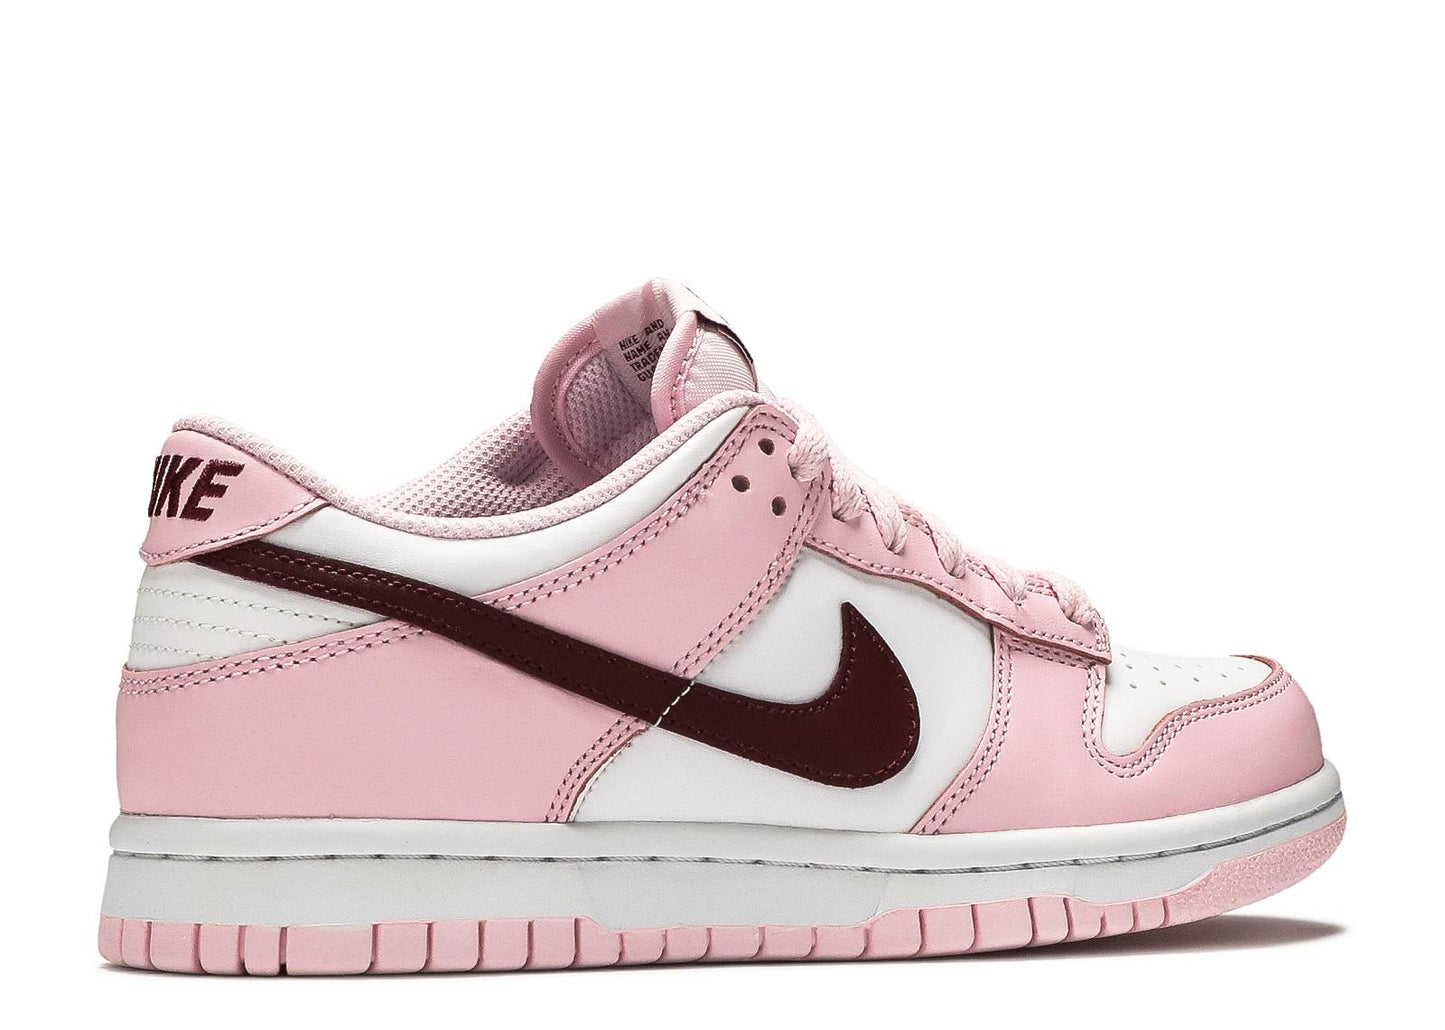 Nike Dunk Low GS "Valentine's Day"